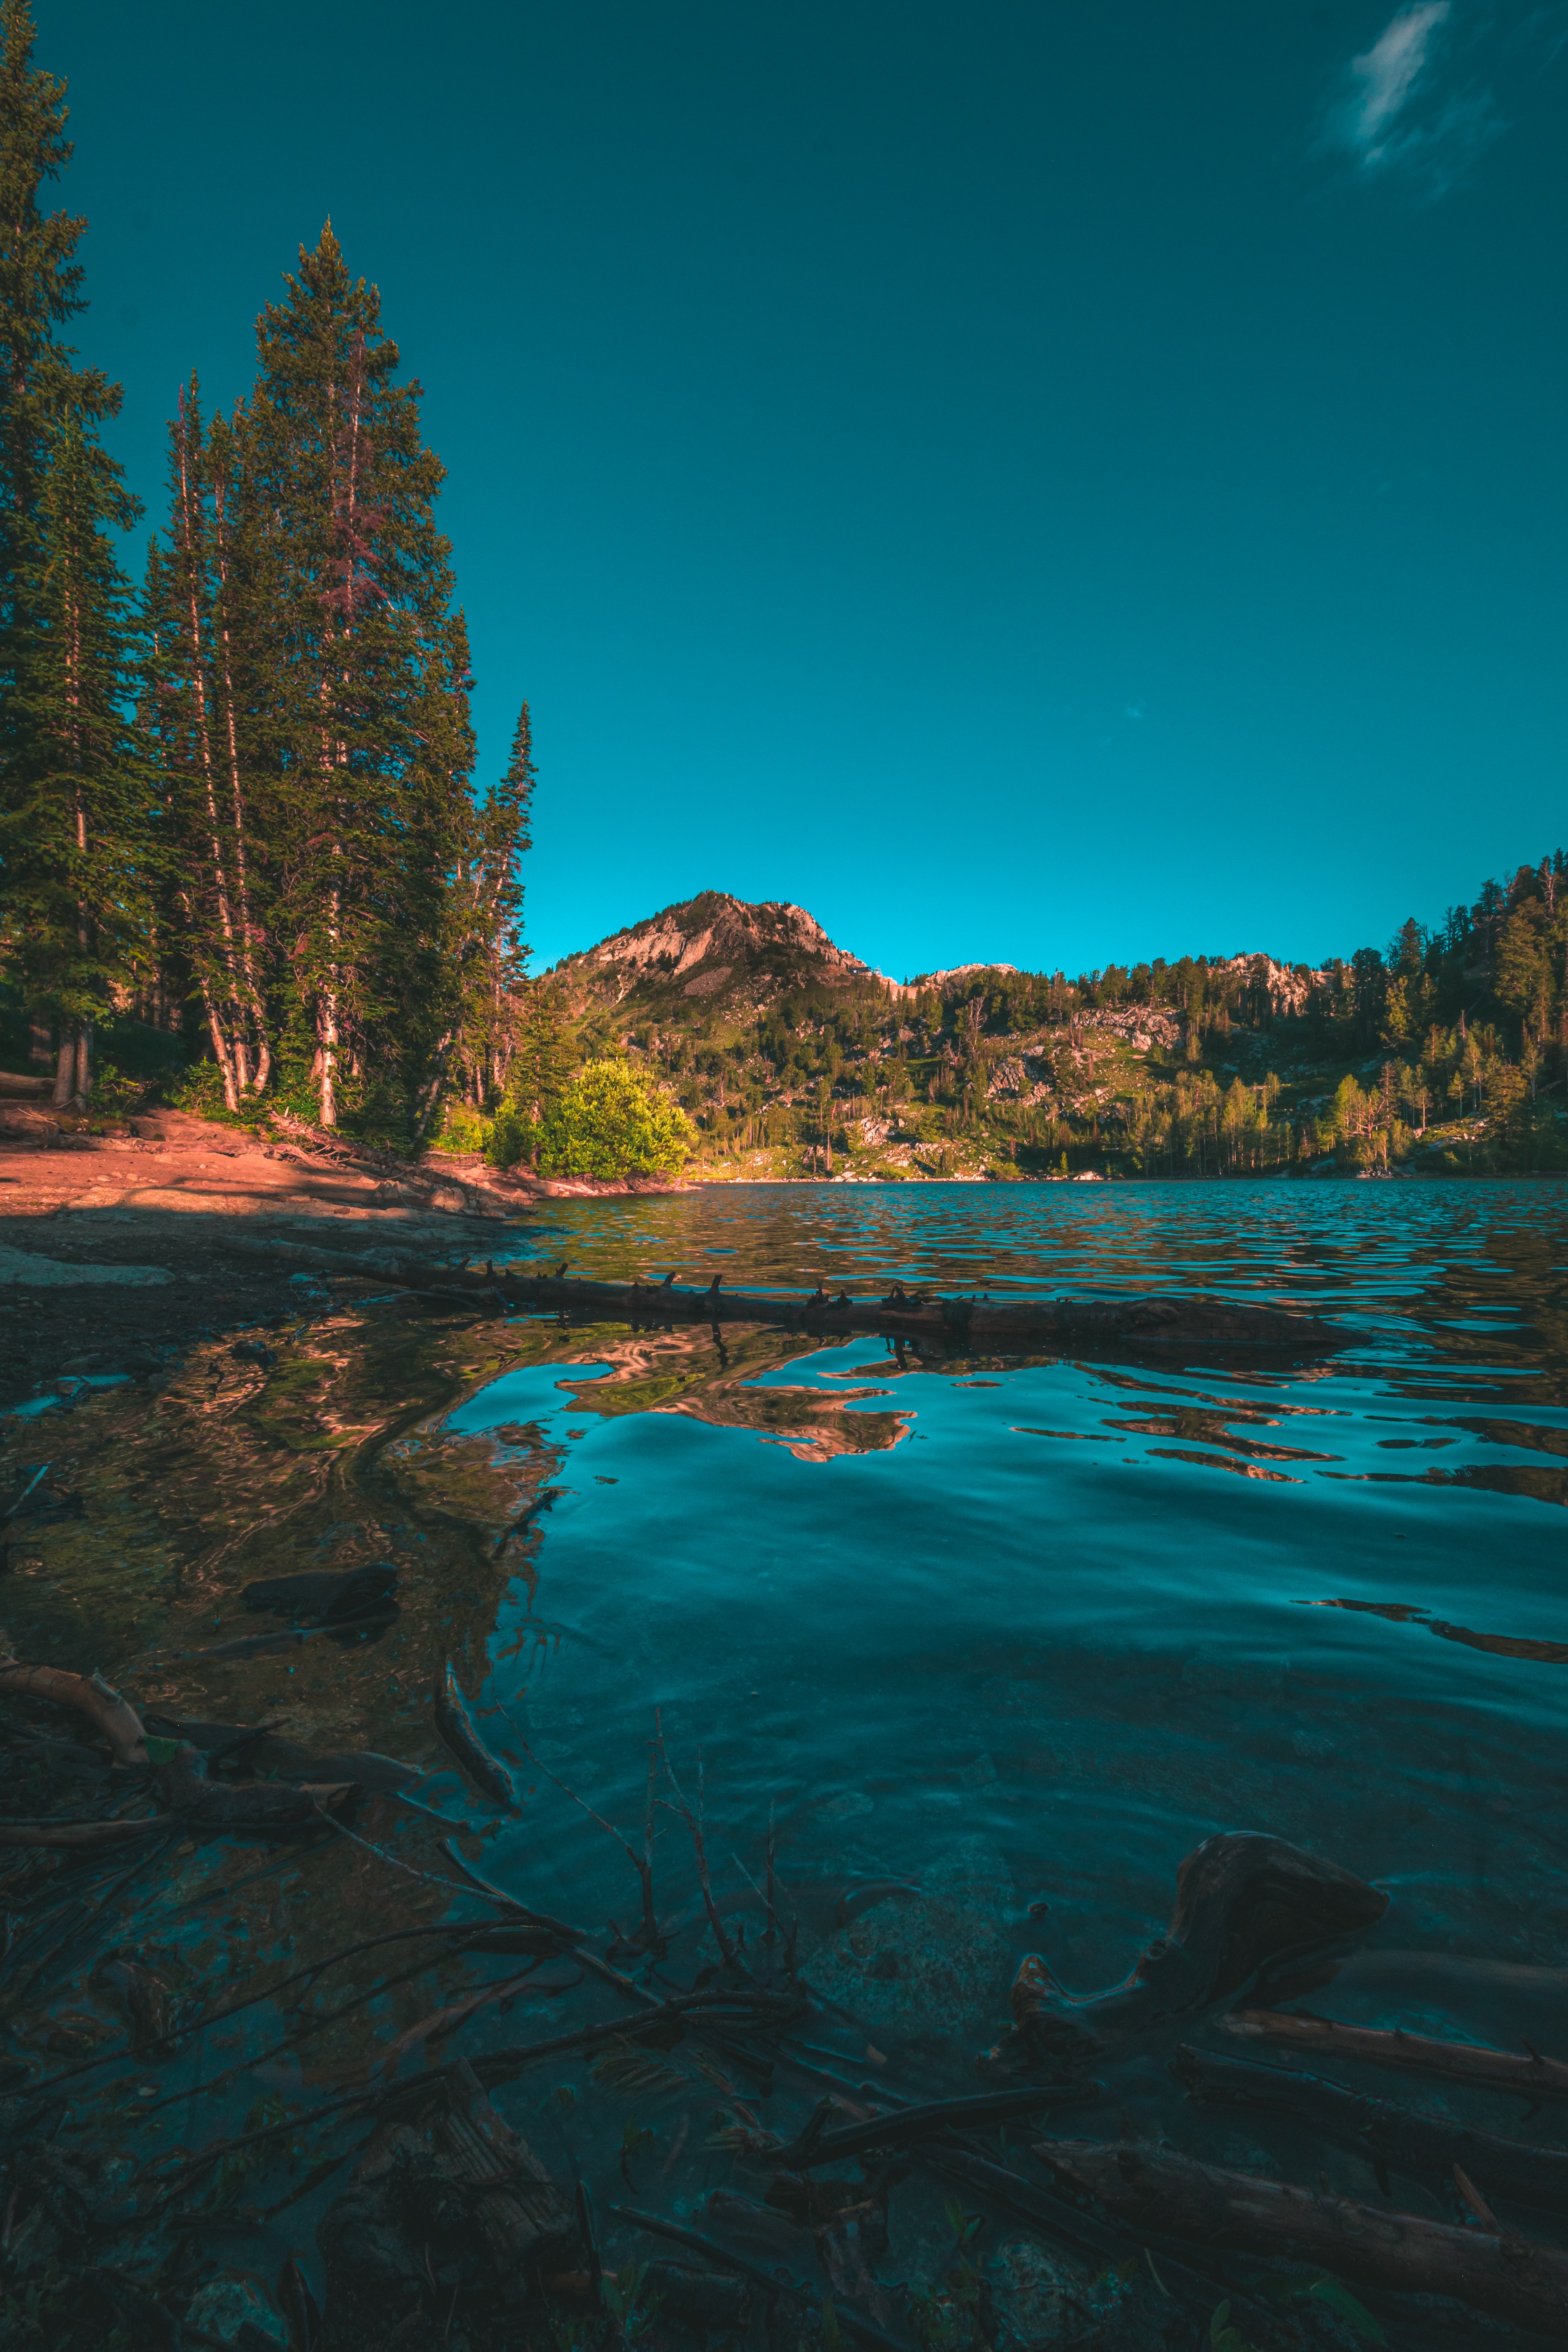 android landscape, nature, trees, mountains, lake, spruce, fir